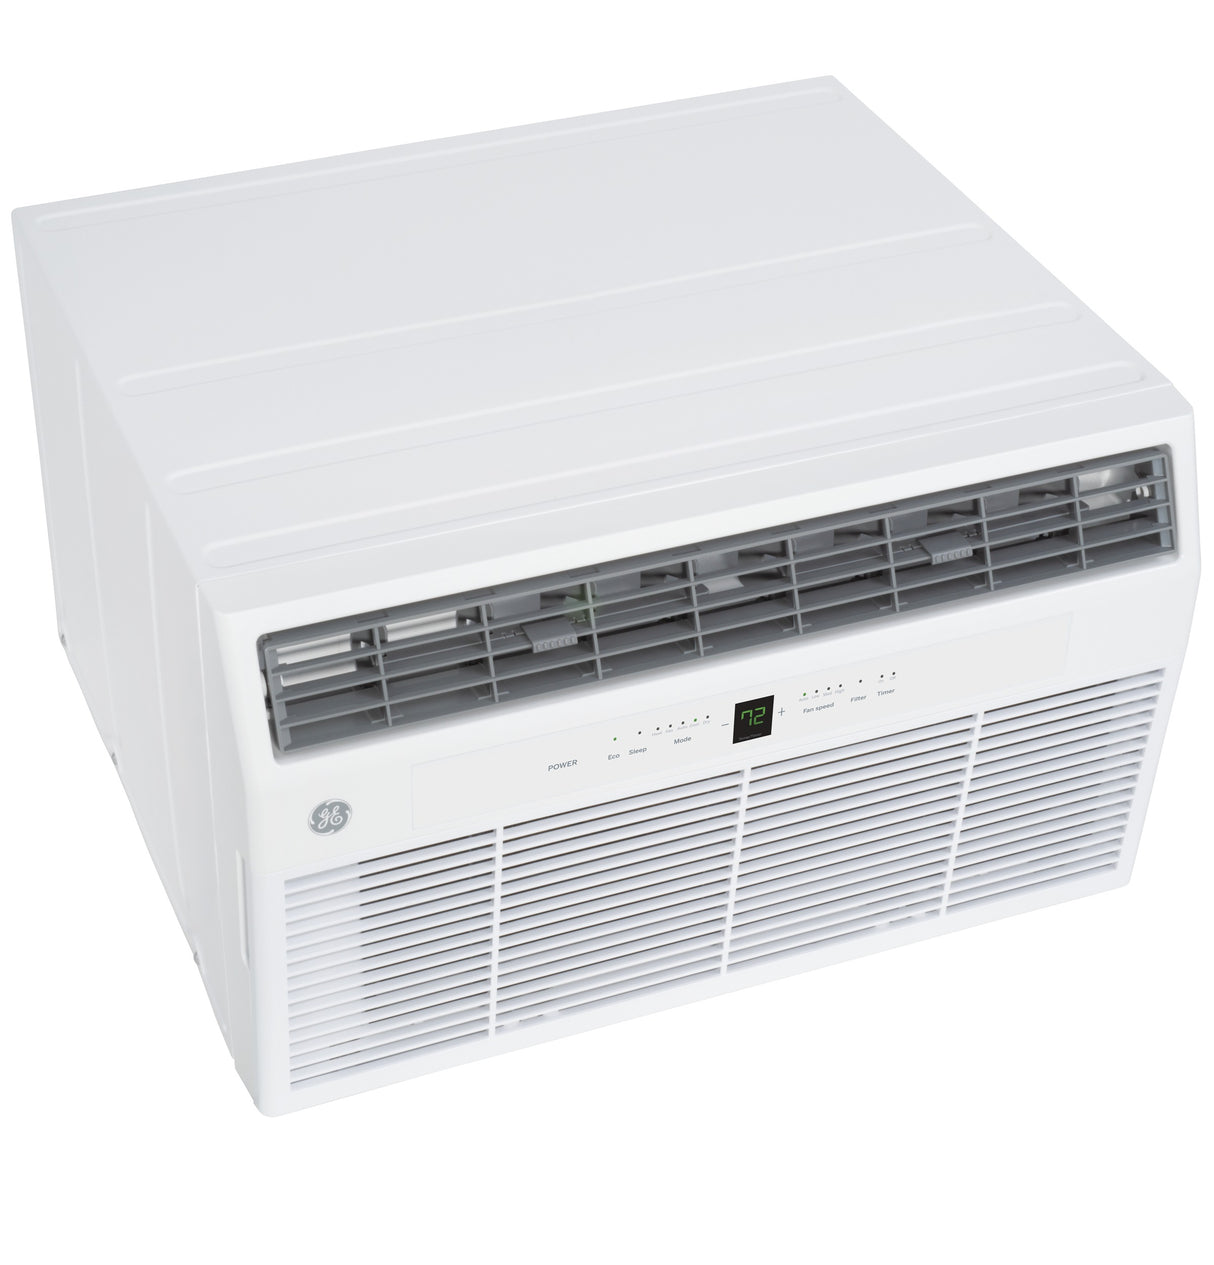 GE(R) Built In Air Conditioner - (AKEQ12DCH)